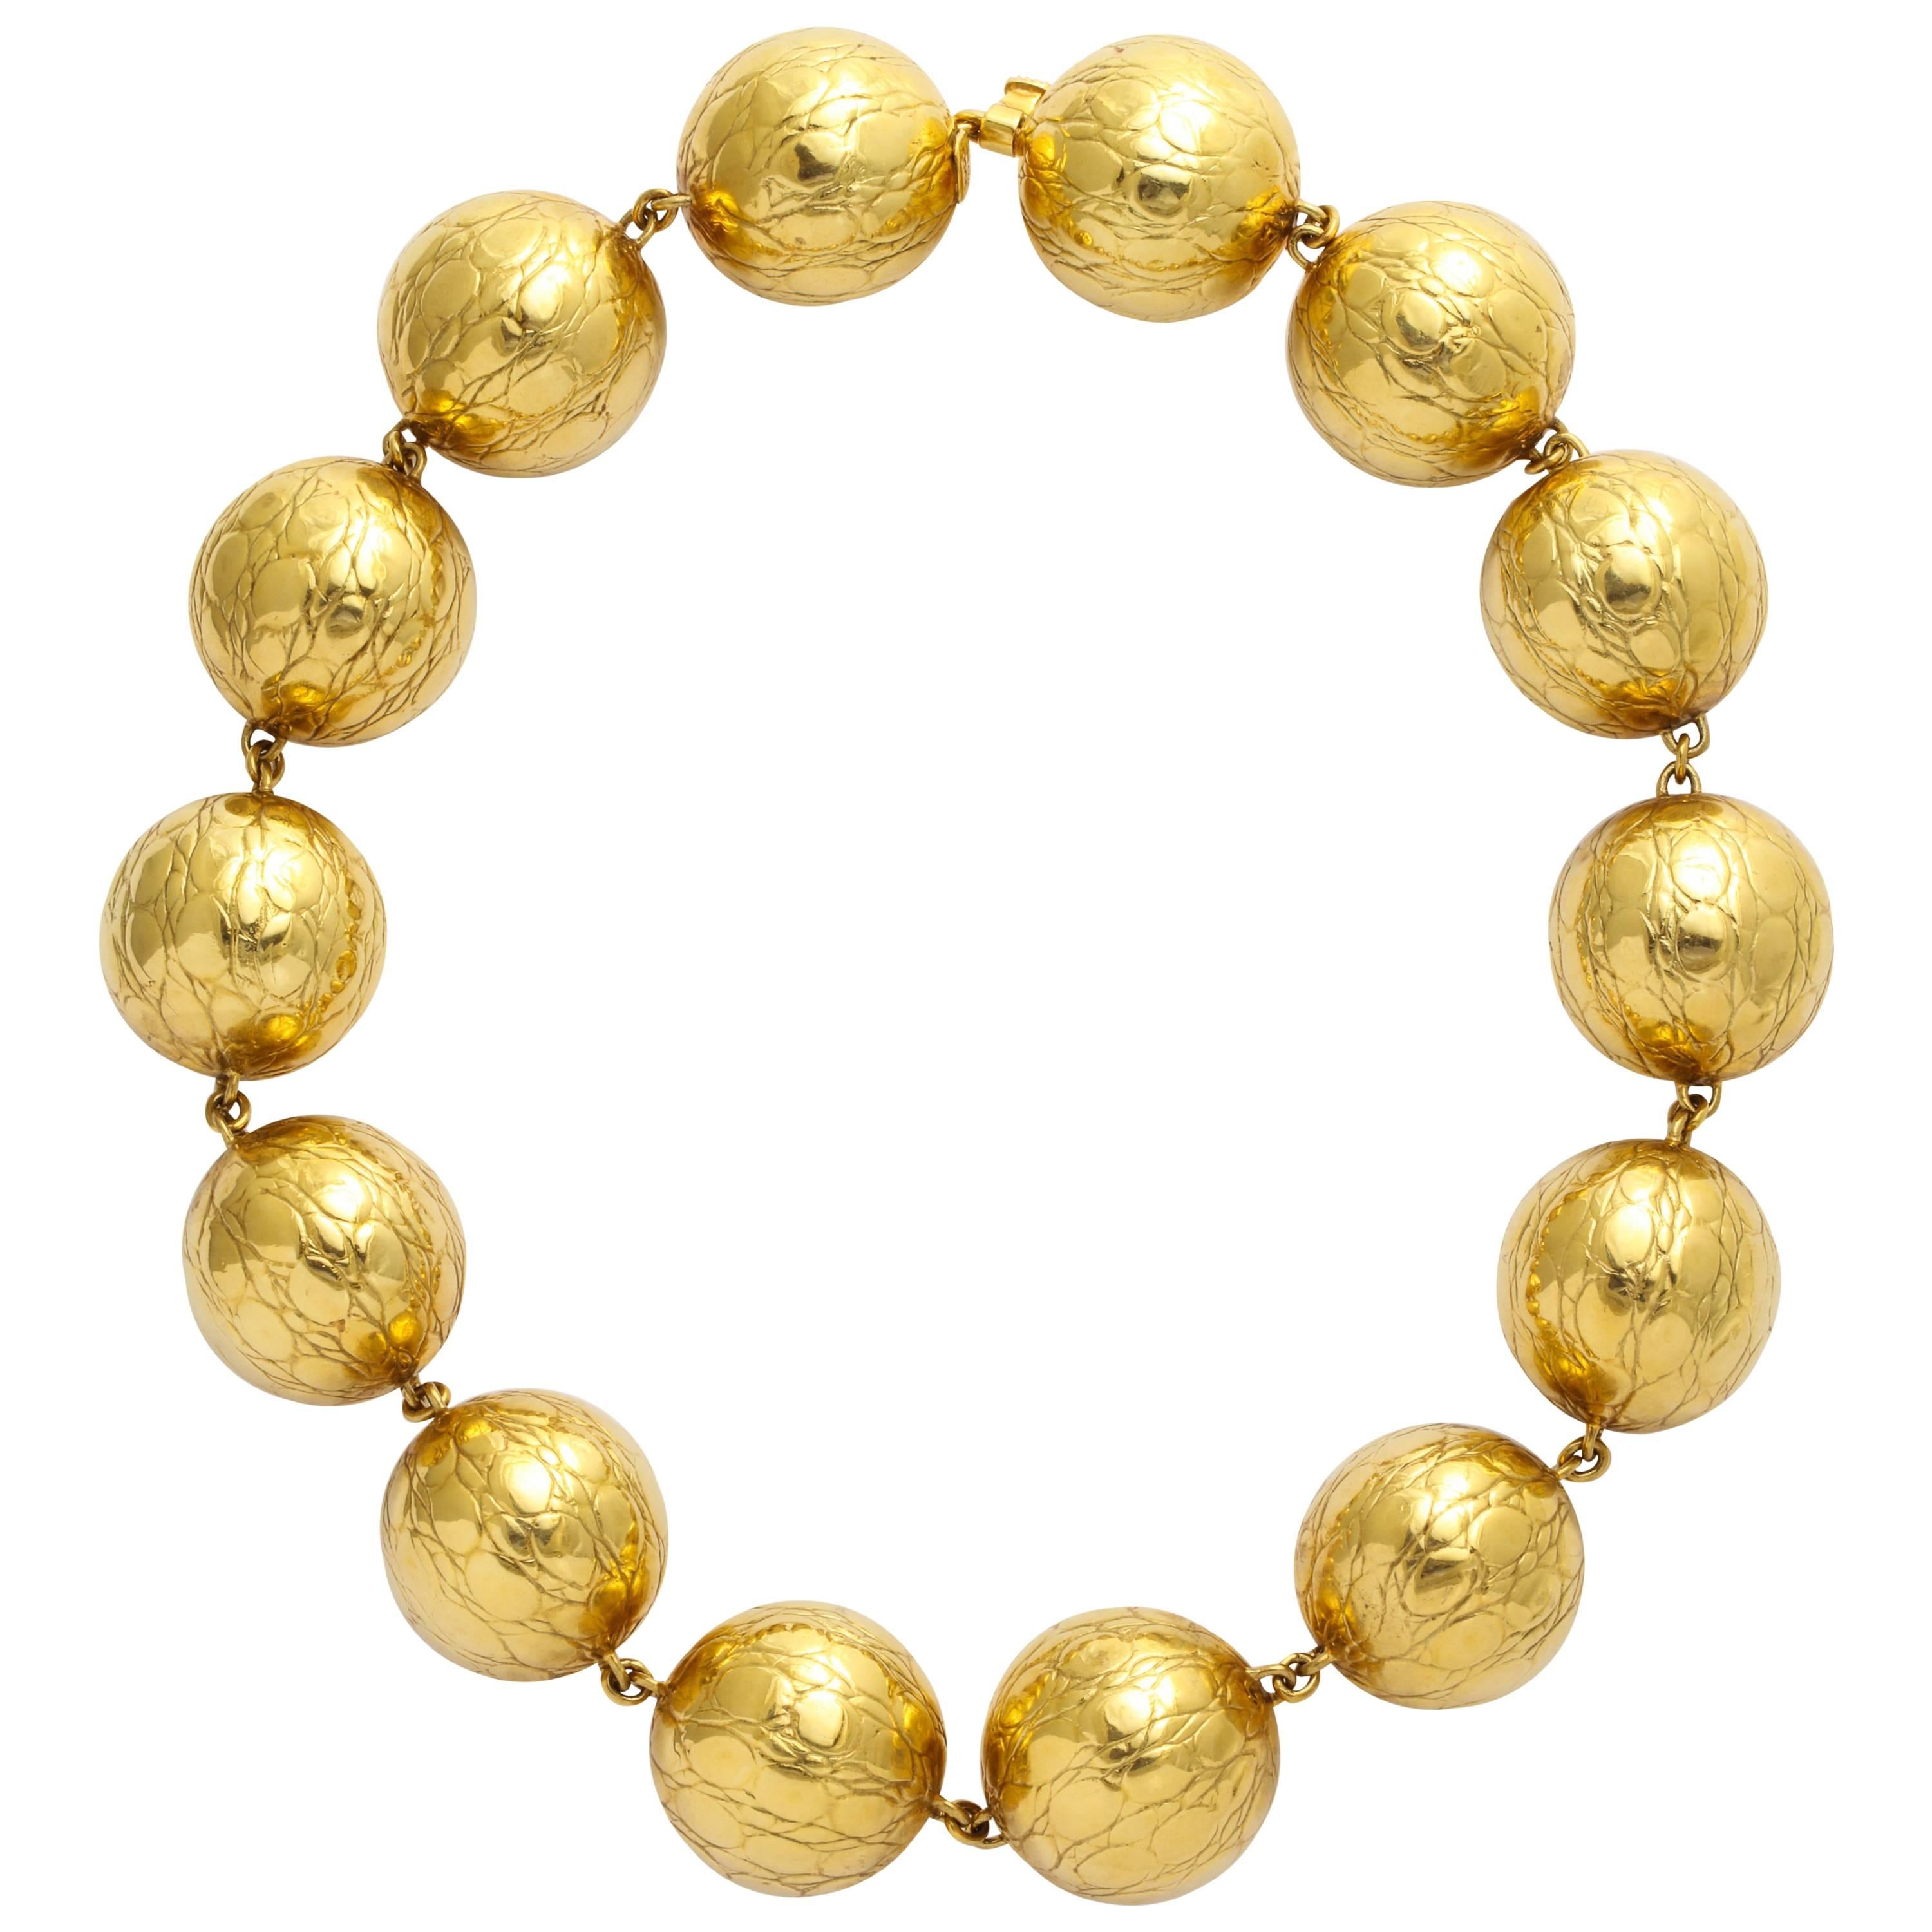 Gucci Alligator Finish Large Gold Ball Necklace